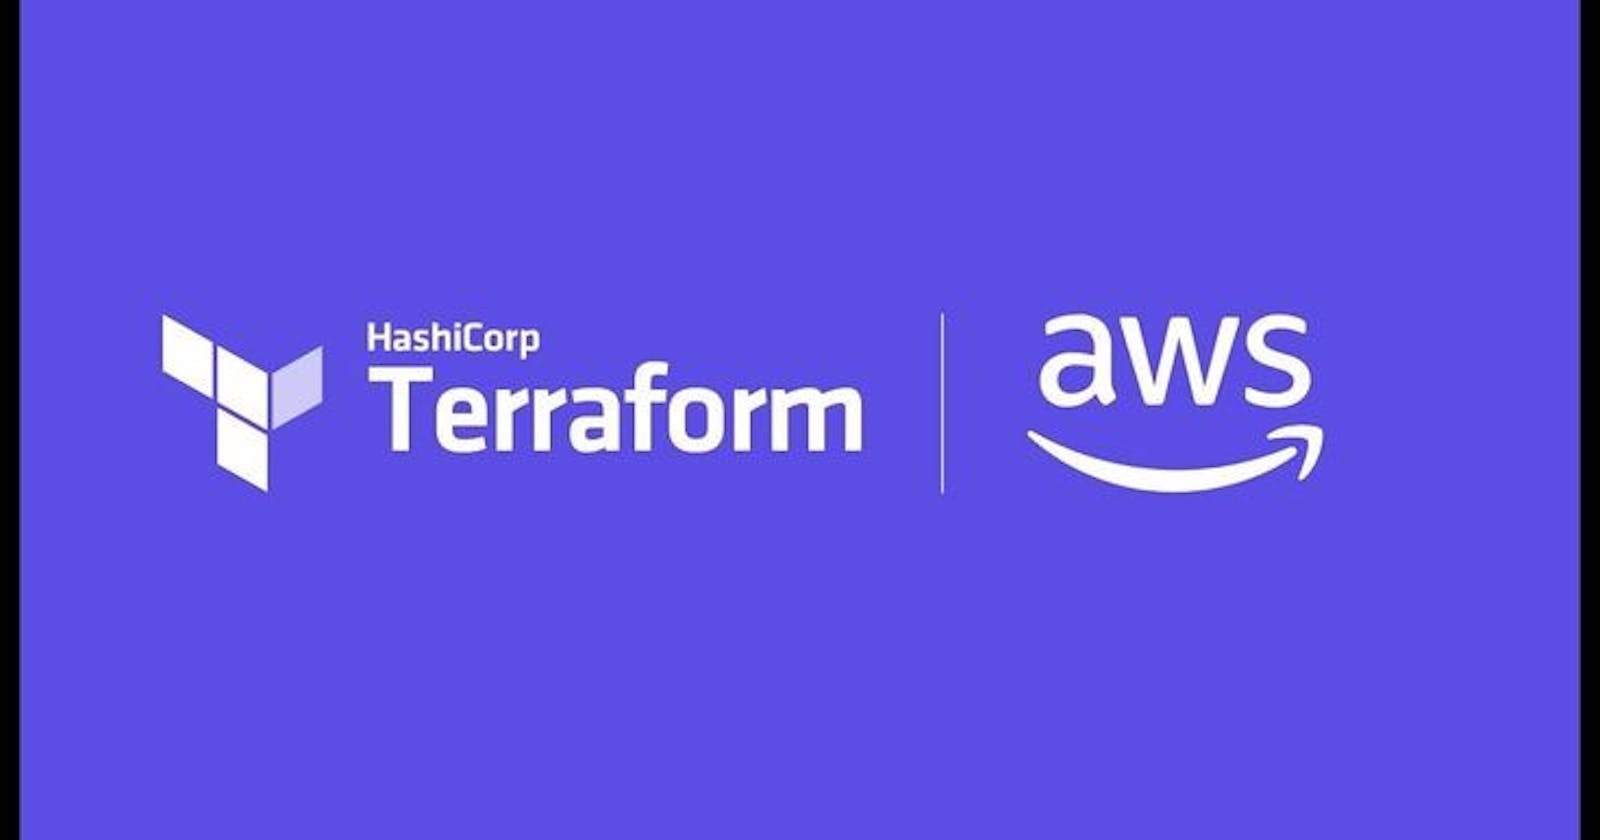 Infrastructure as a code with Terraform, Ansible and AWS.